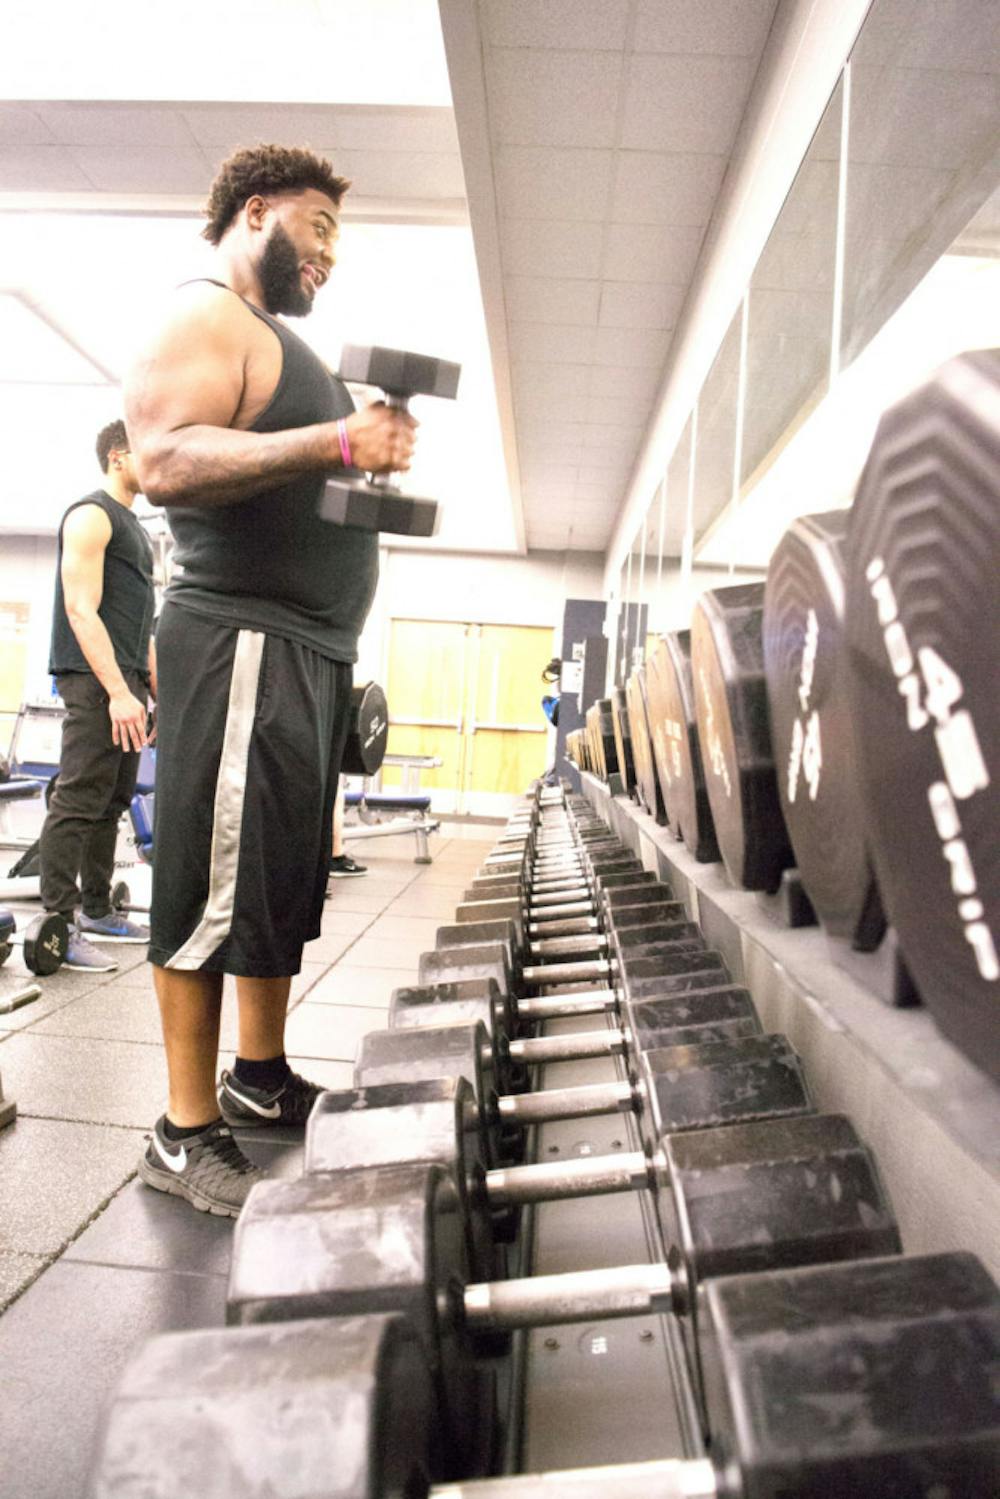 <p>A student lifts weights at the current U of M recreation center. President M. David Rudd announced there would be an 18 month delay on construction of a new rec center, which was supposed to start this semester.&nbsp;</p>